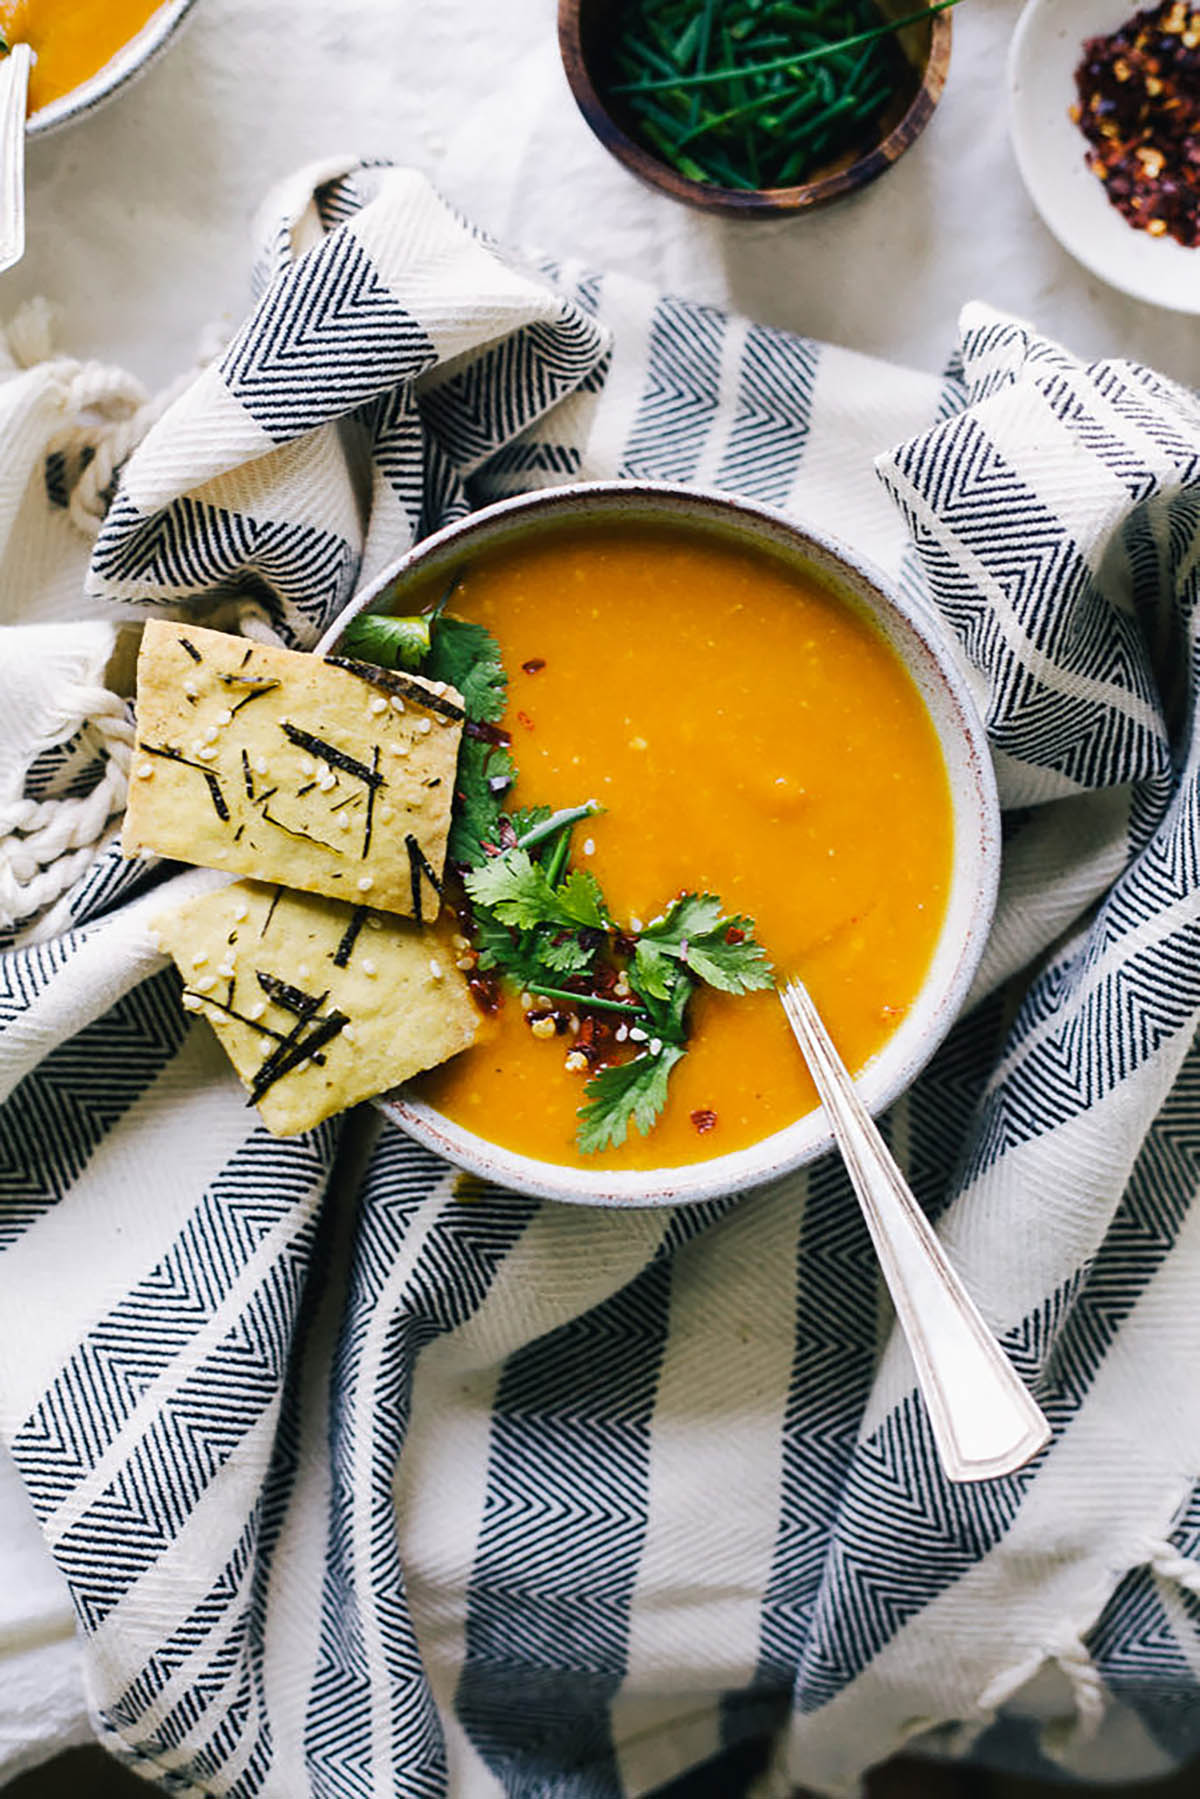 Carrot soup with seaweed crackers on the bowl.